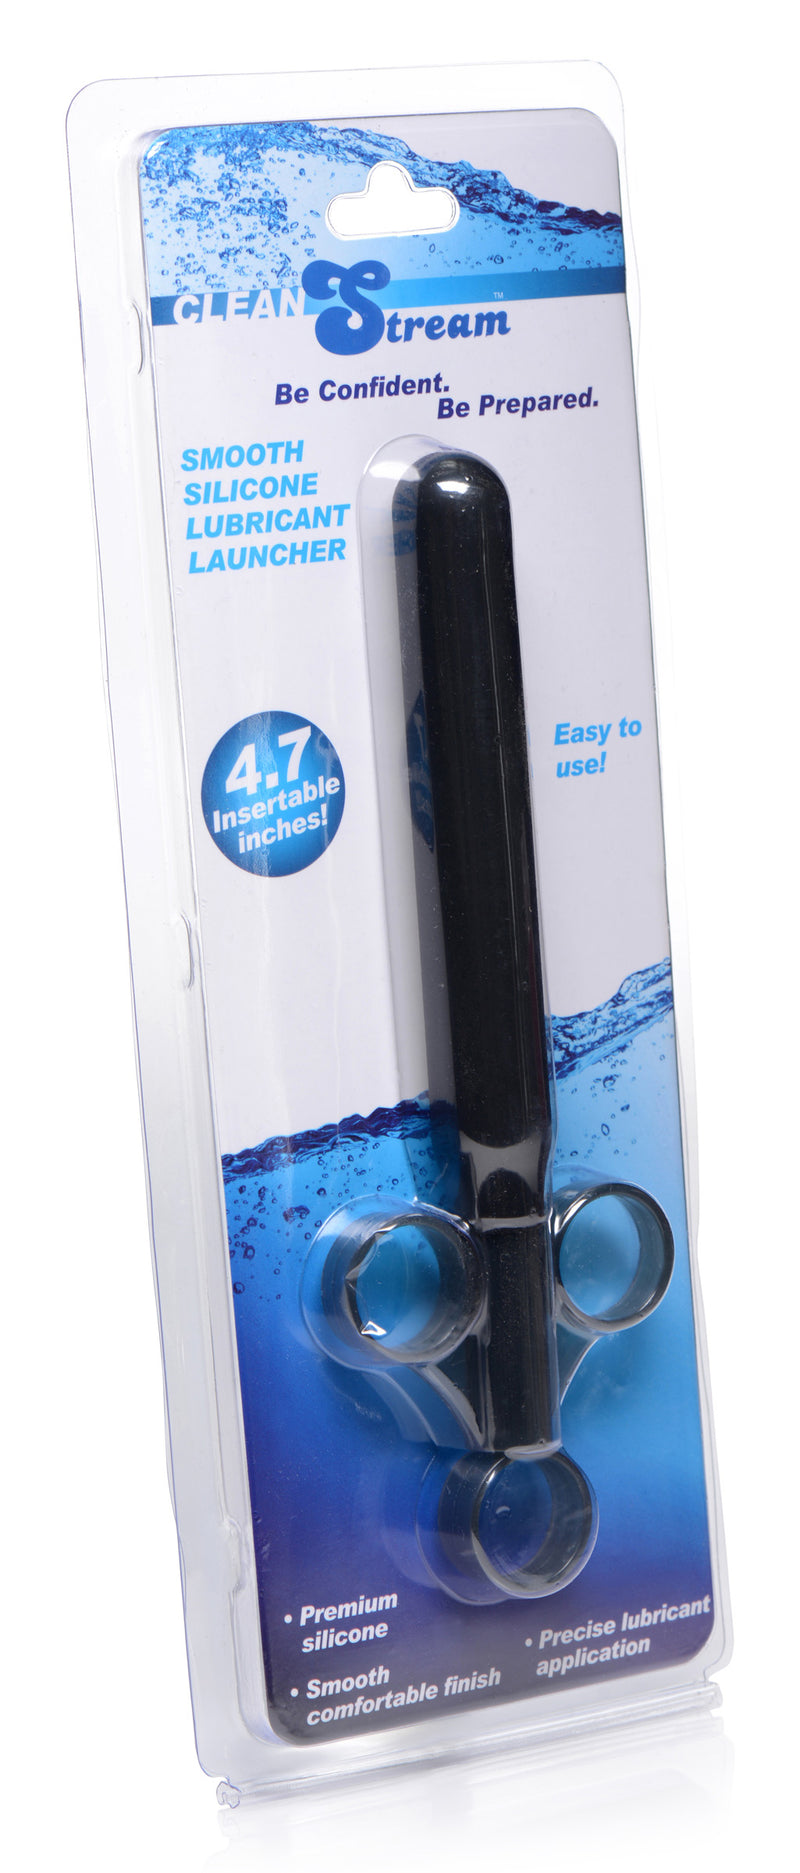 Smooth Silicone Lubricant Launcher lube-applicator from CleanStream